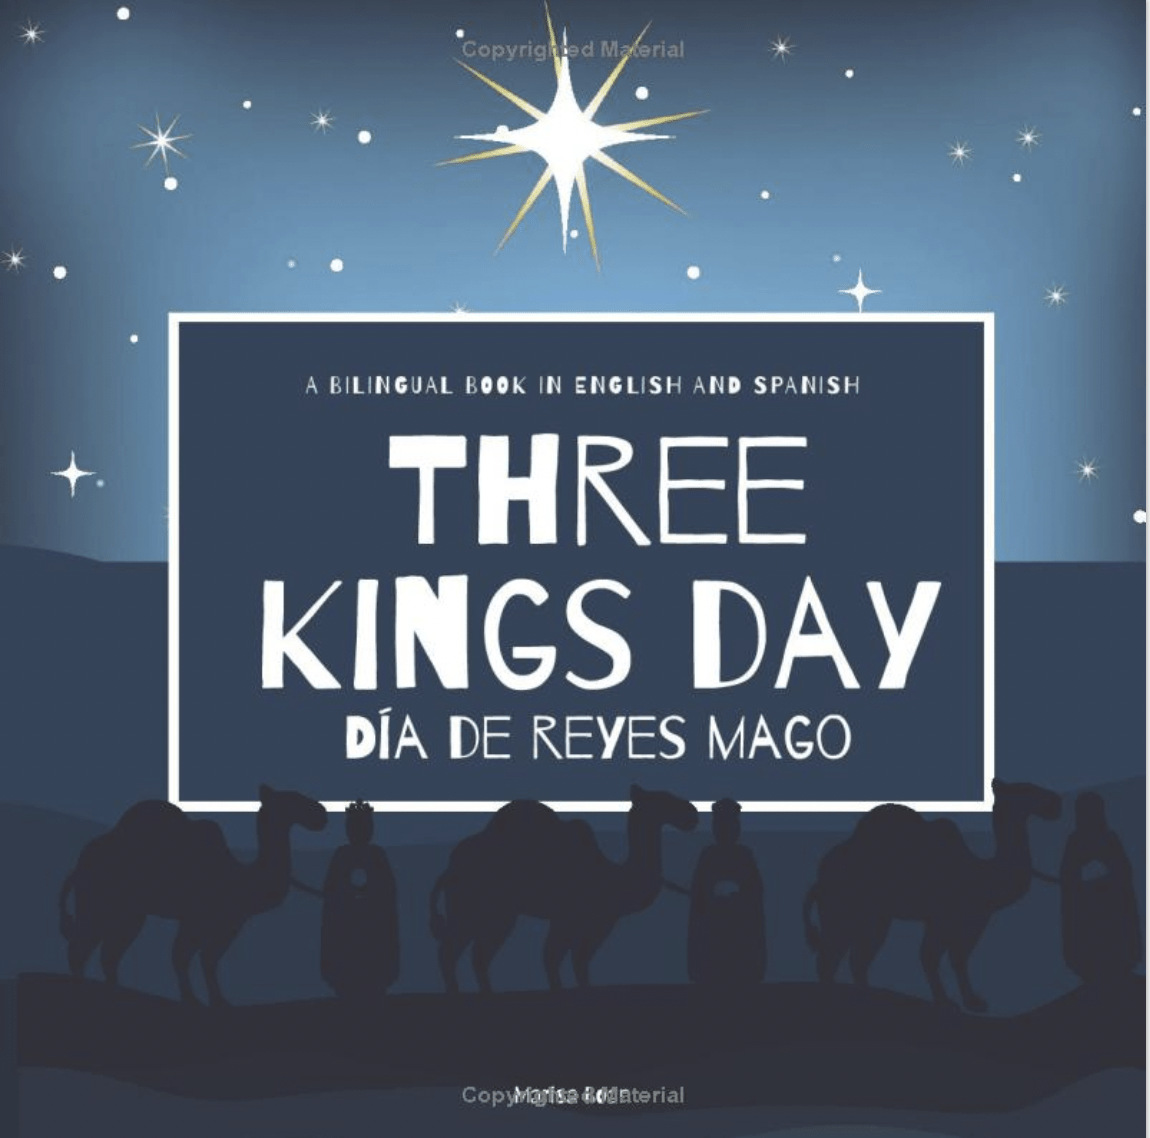 Three Kings Day - Día de Reyes Mago: A Bilingual Book in English and Spanish